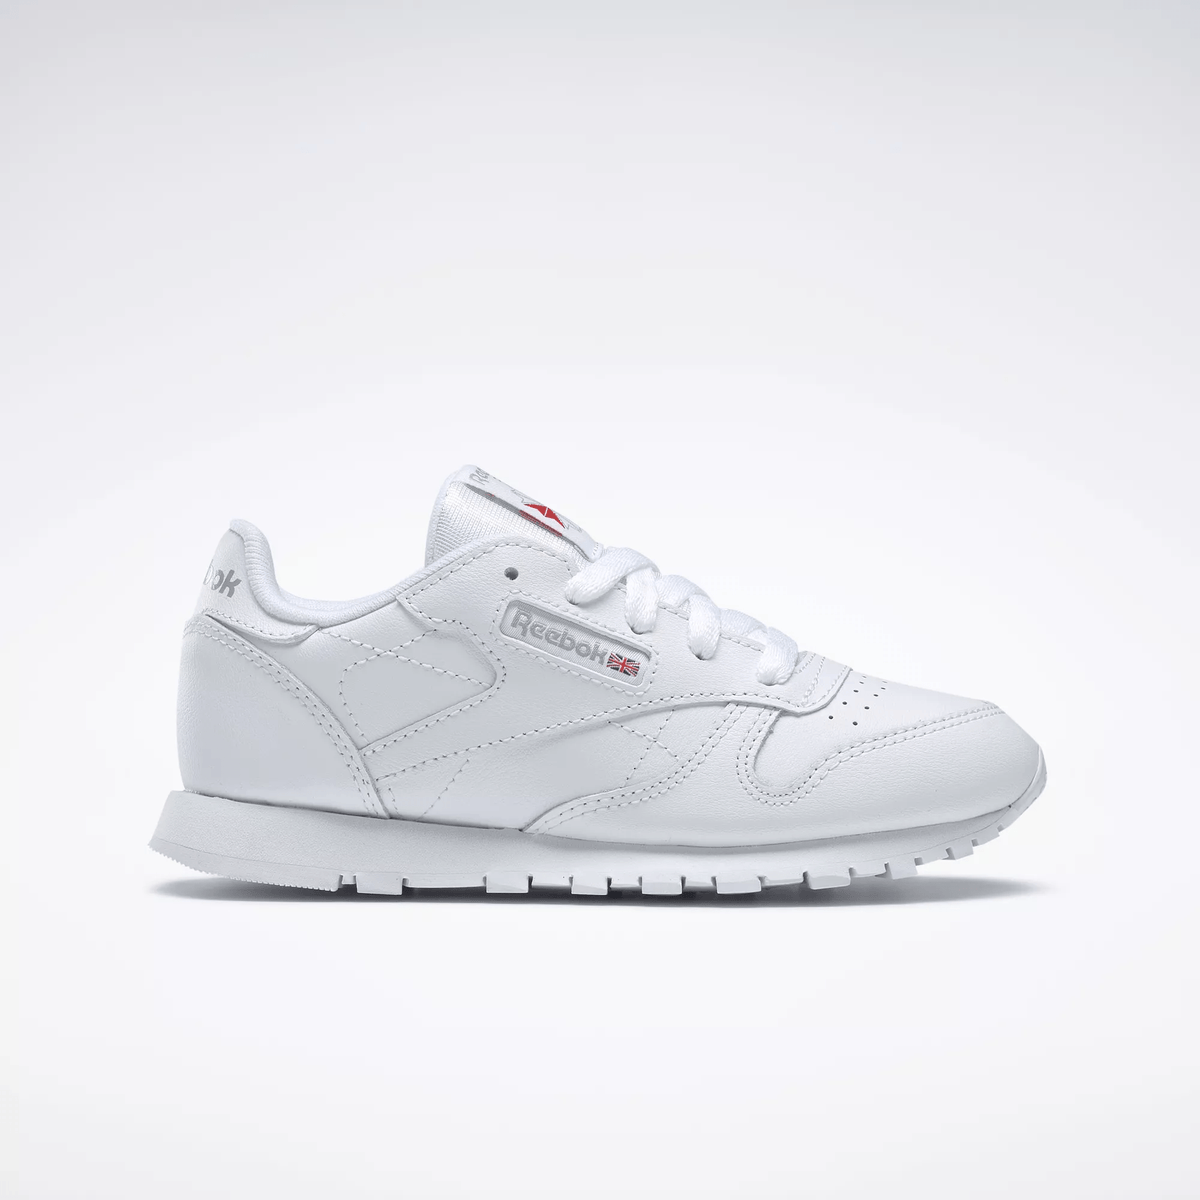 Reebok Men's Classic Leather Shoes White